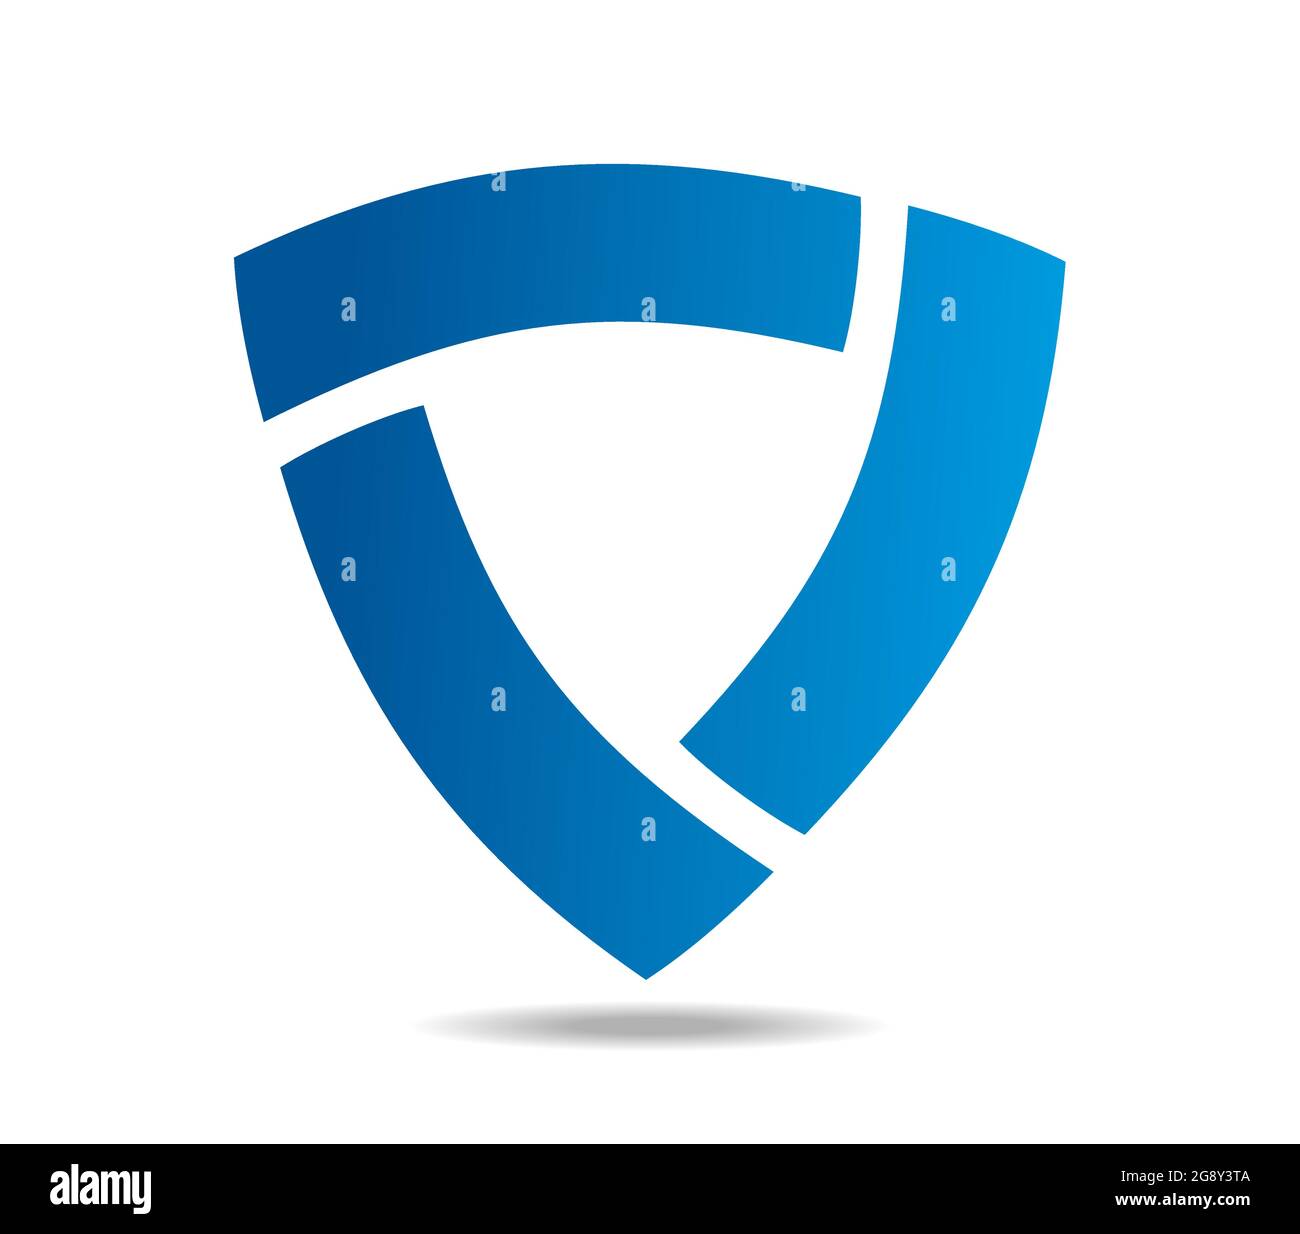 Blue shield made of separated arcs, triangle, Mobiu's loop Stock Vector